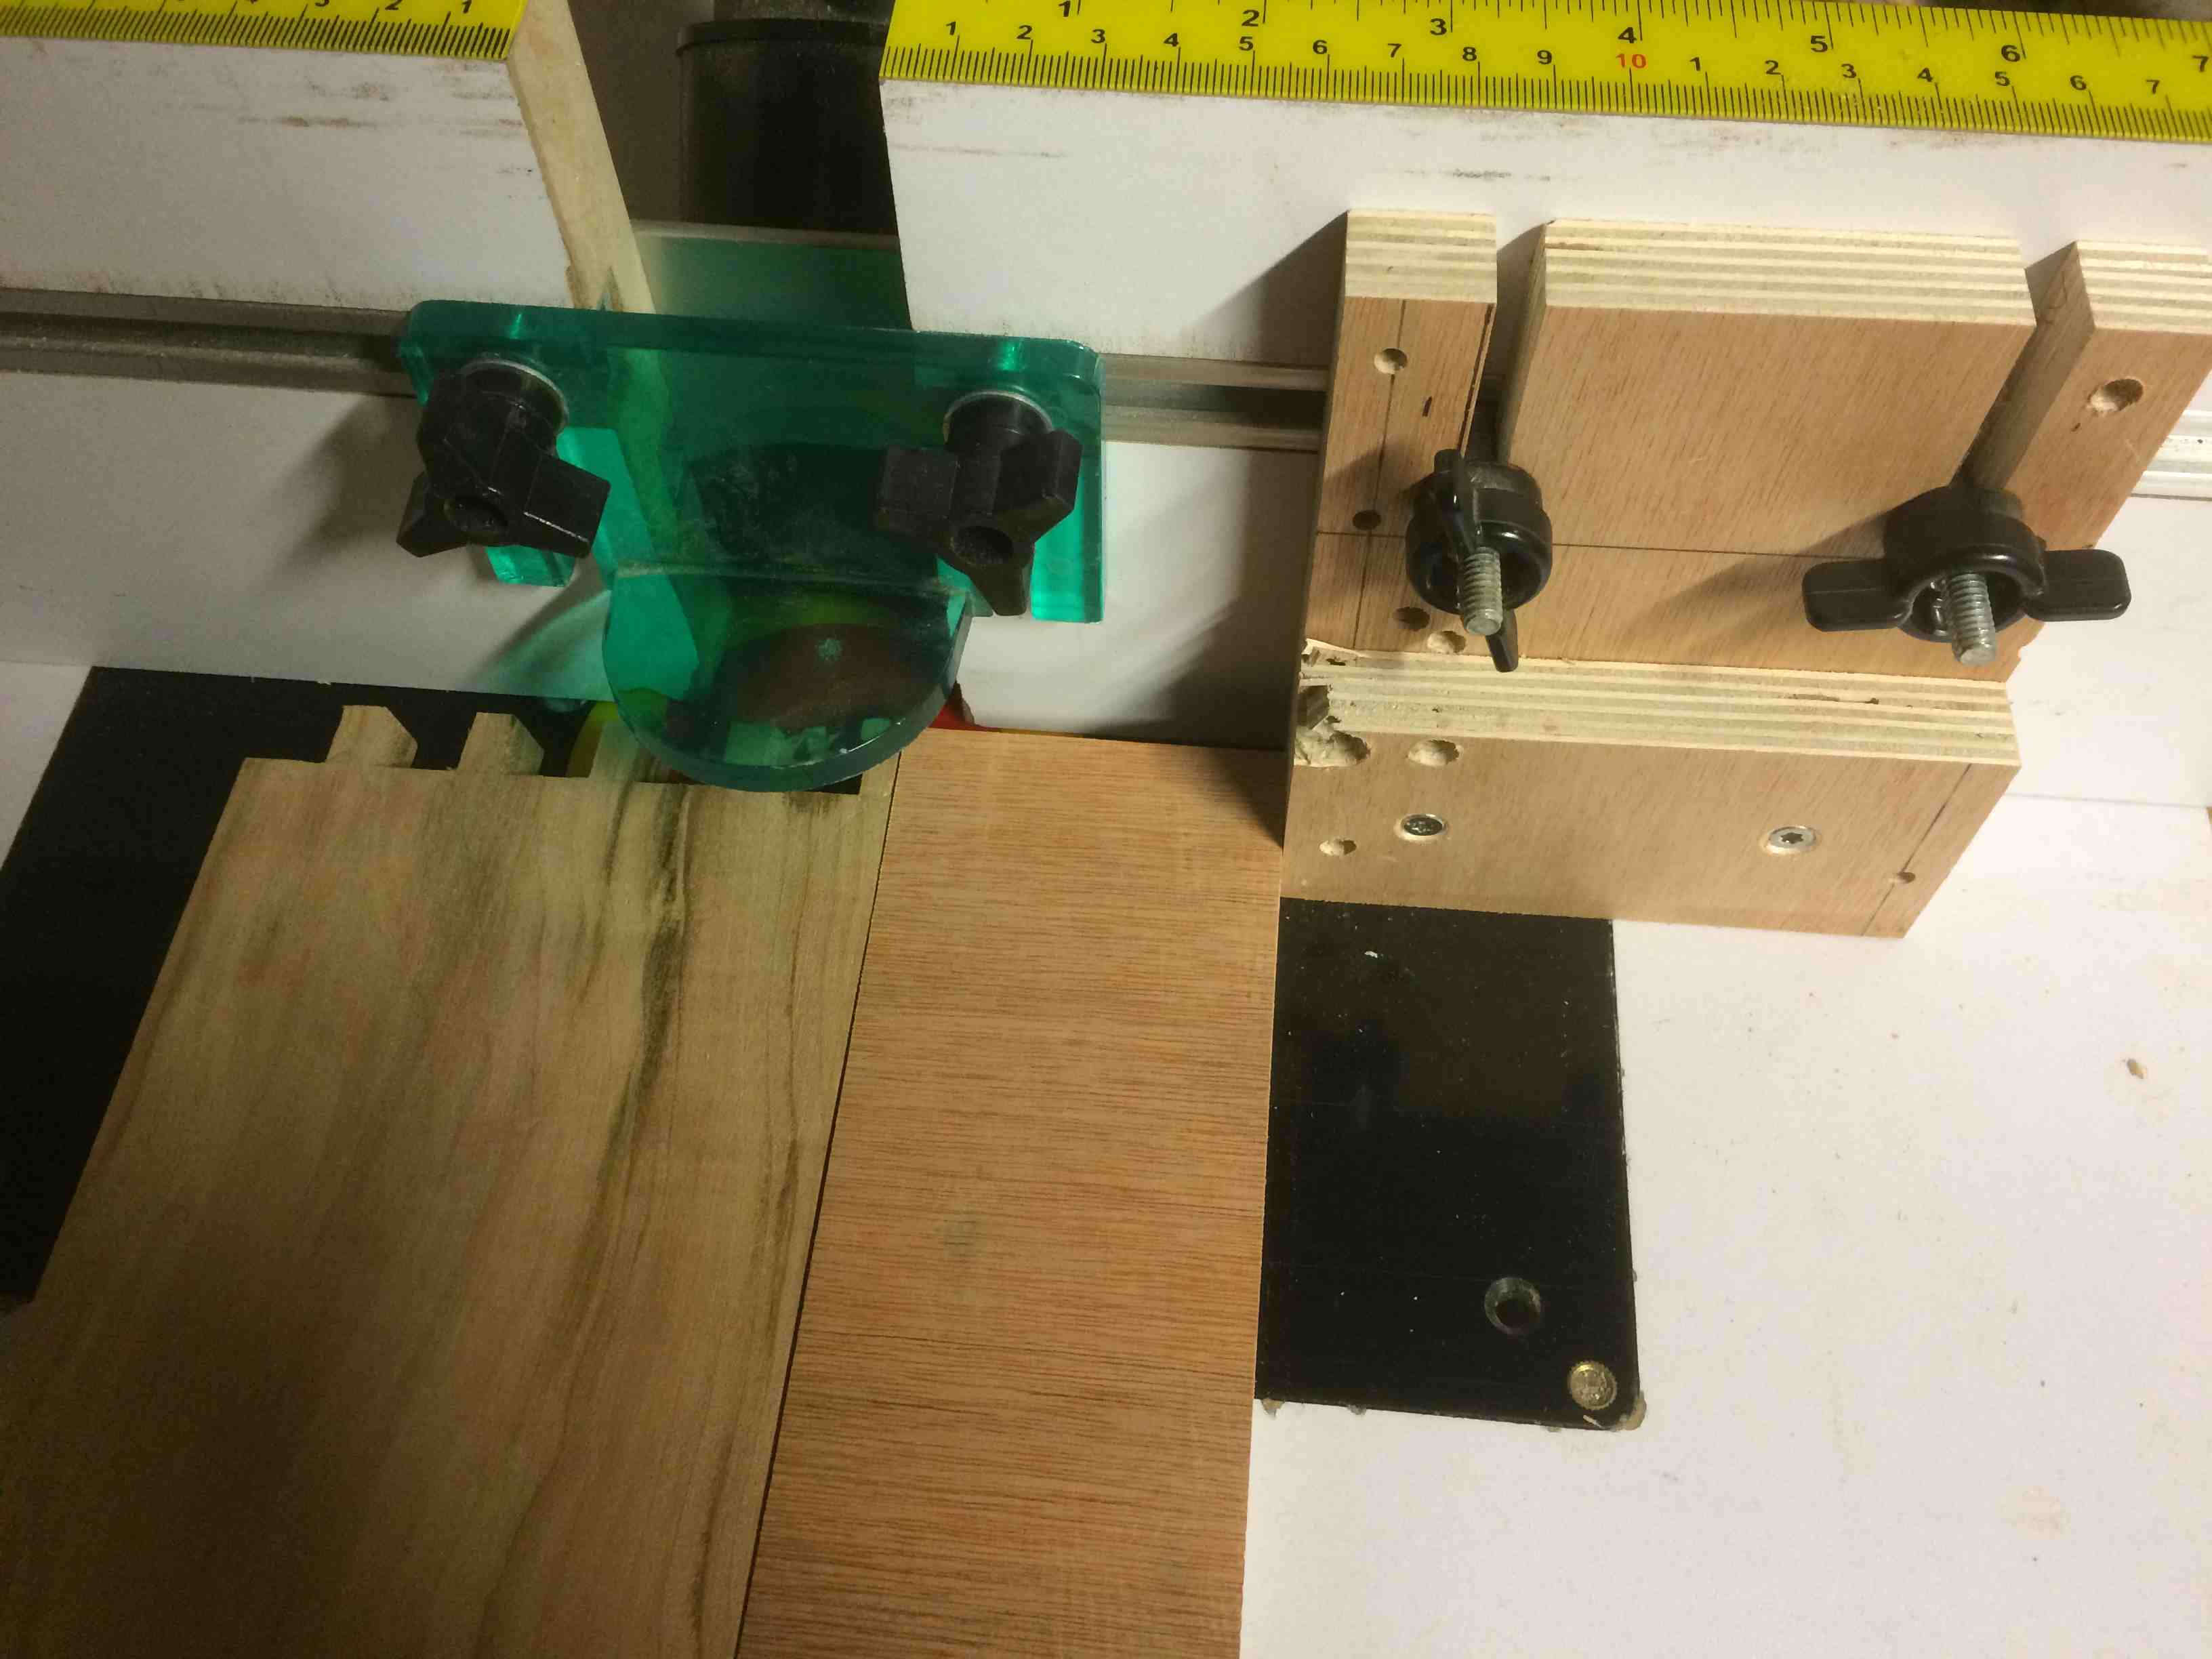 Using a test piece to set up lapped dovetails